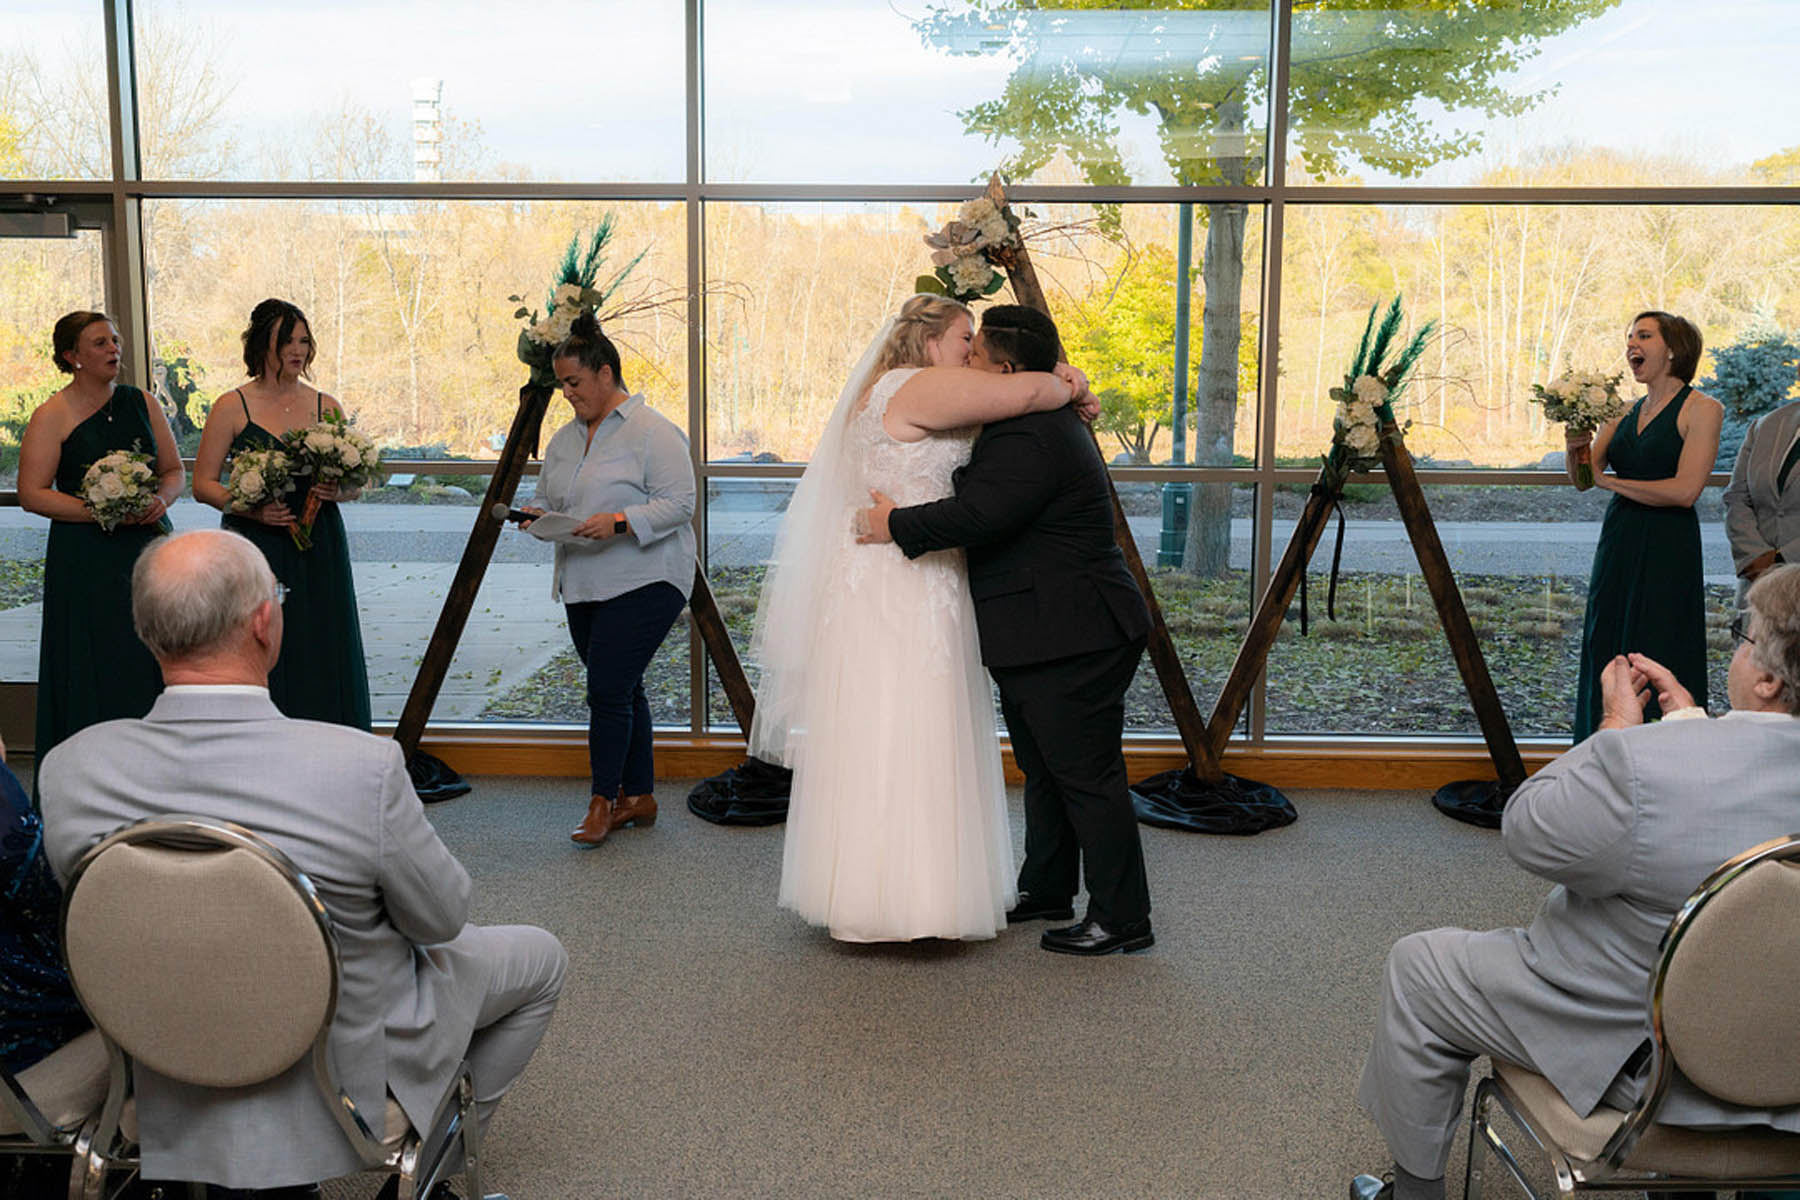 Two brides embrace as they share their first kiss as newlyweds